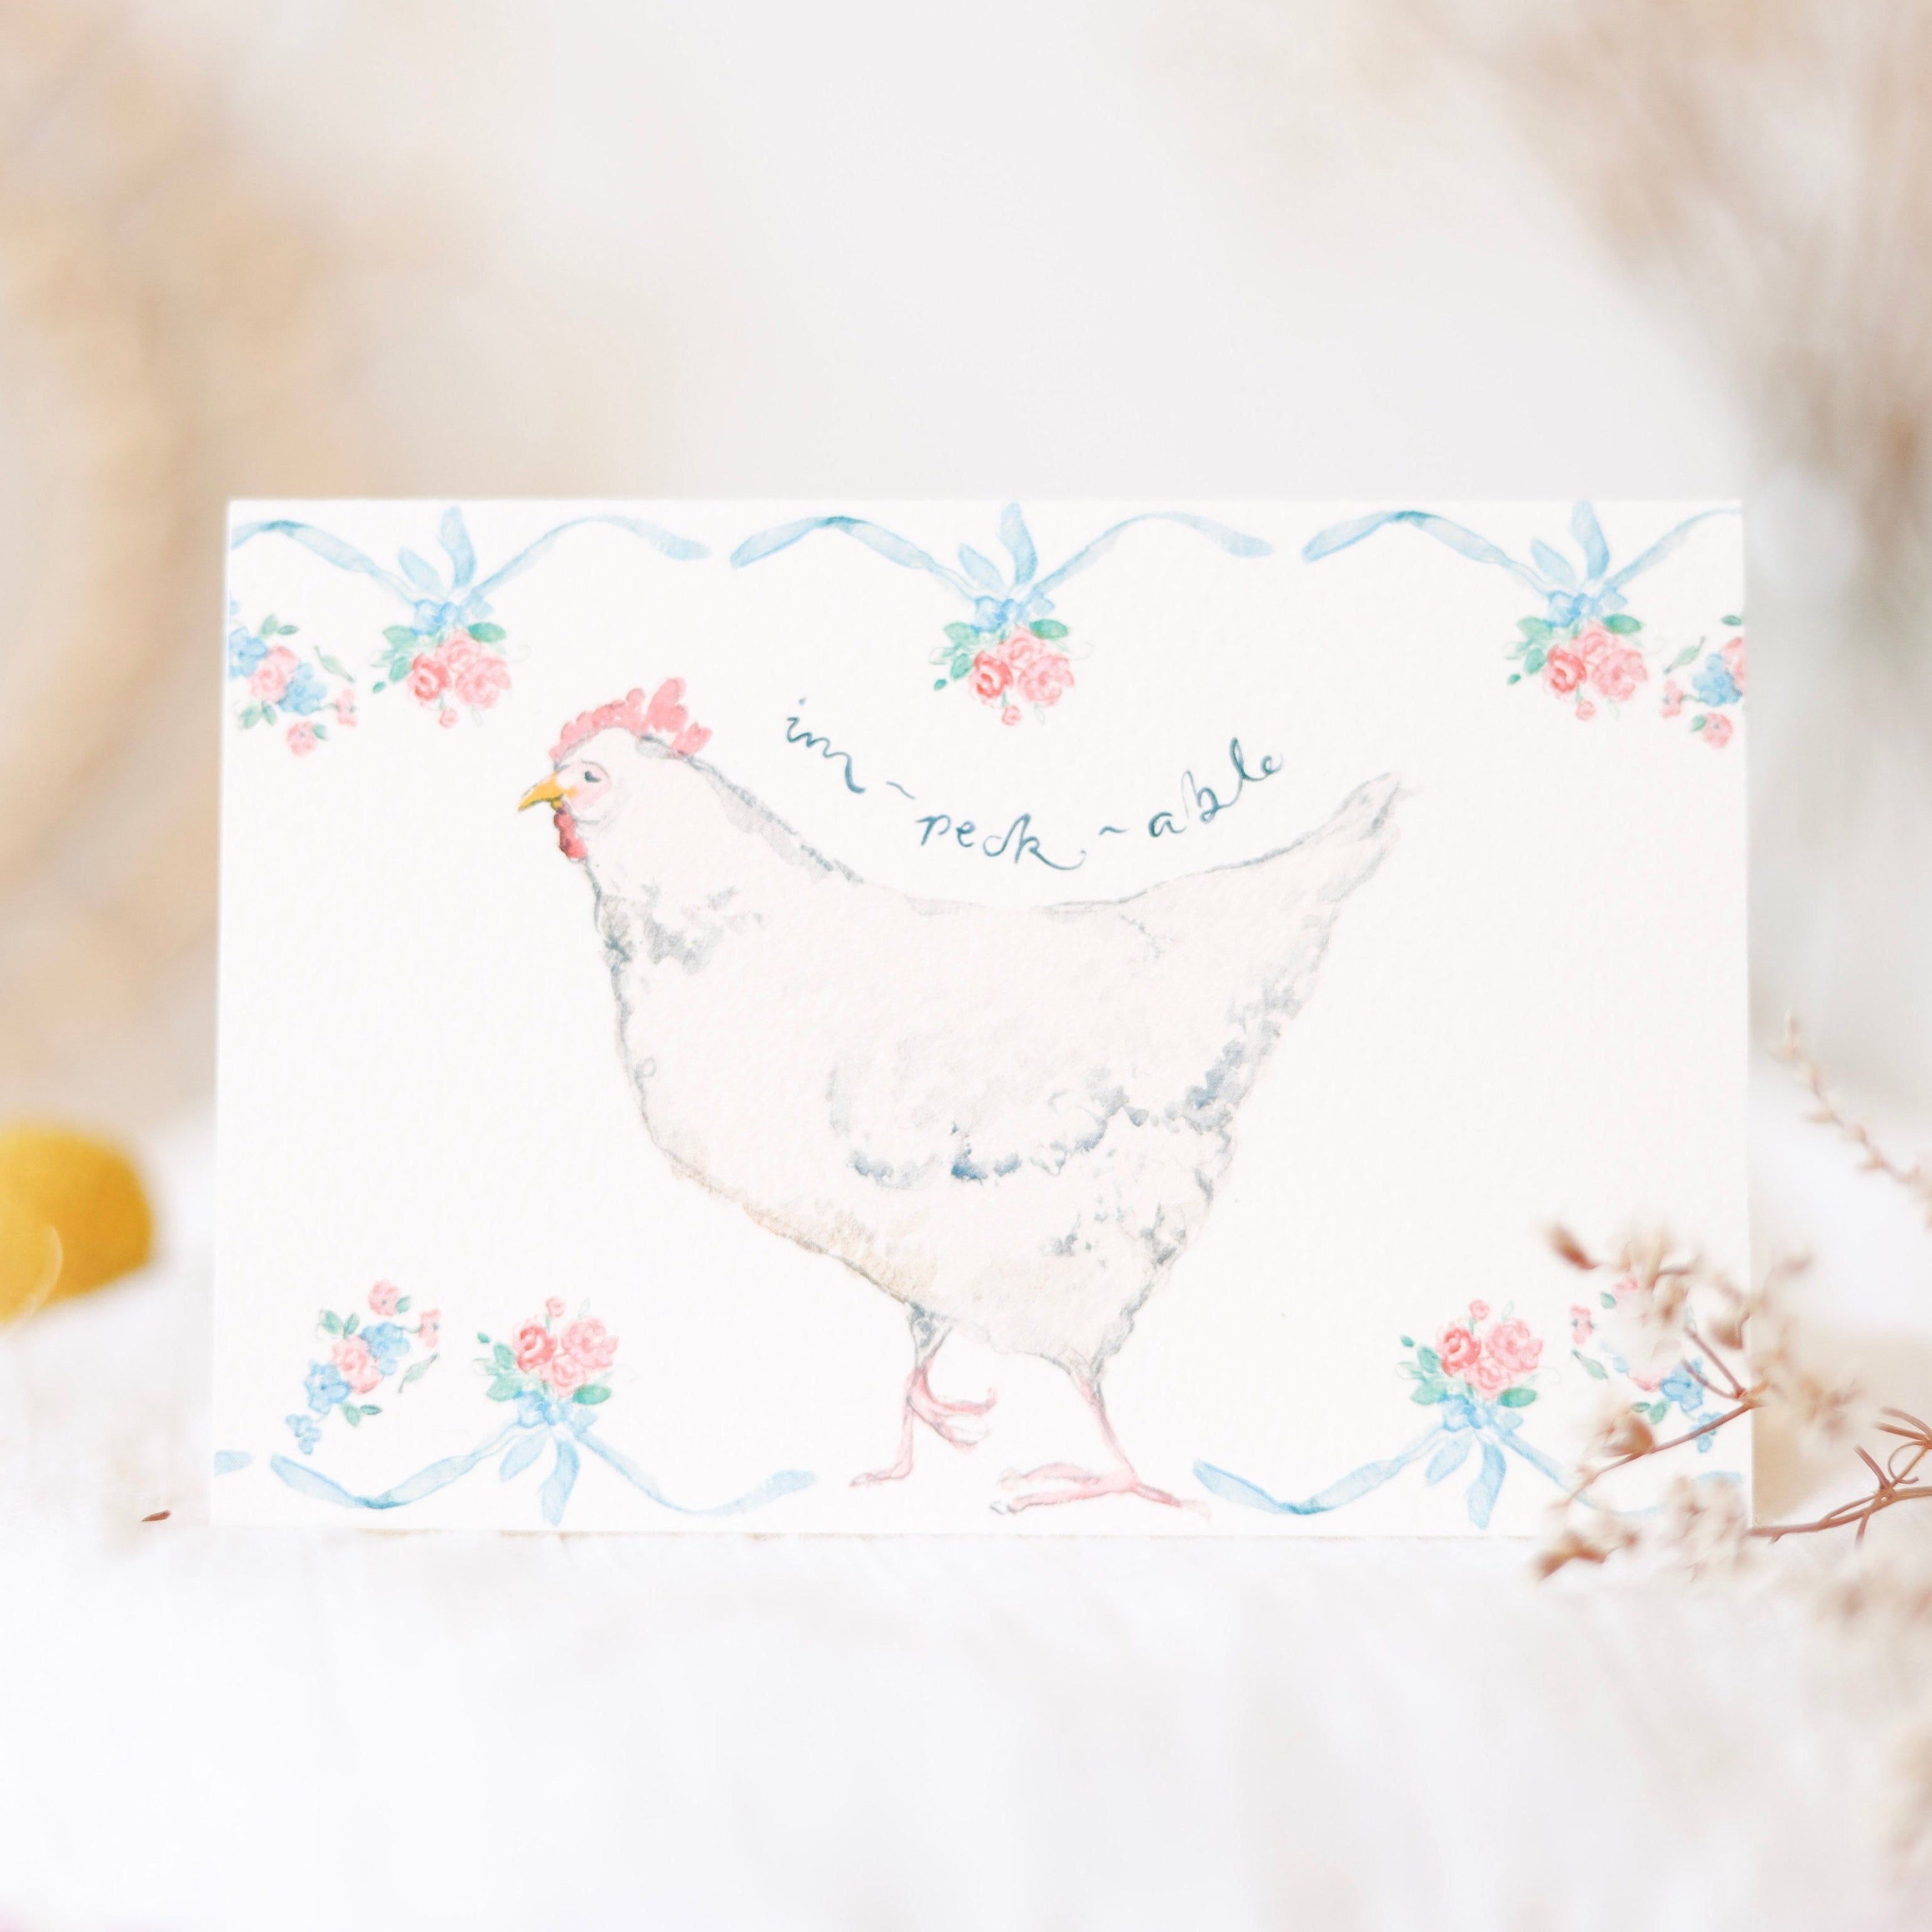 Im-peck-able Hen Greetings Card